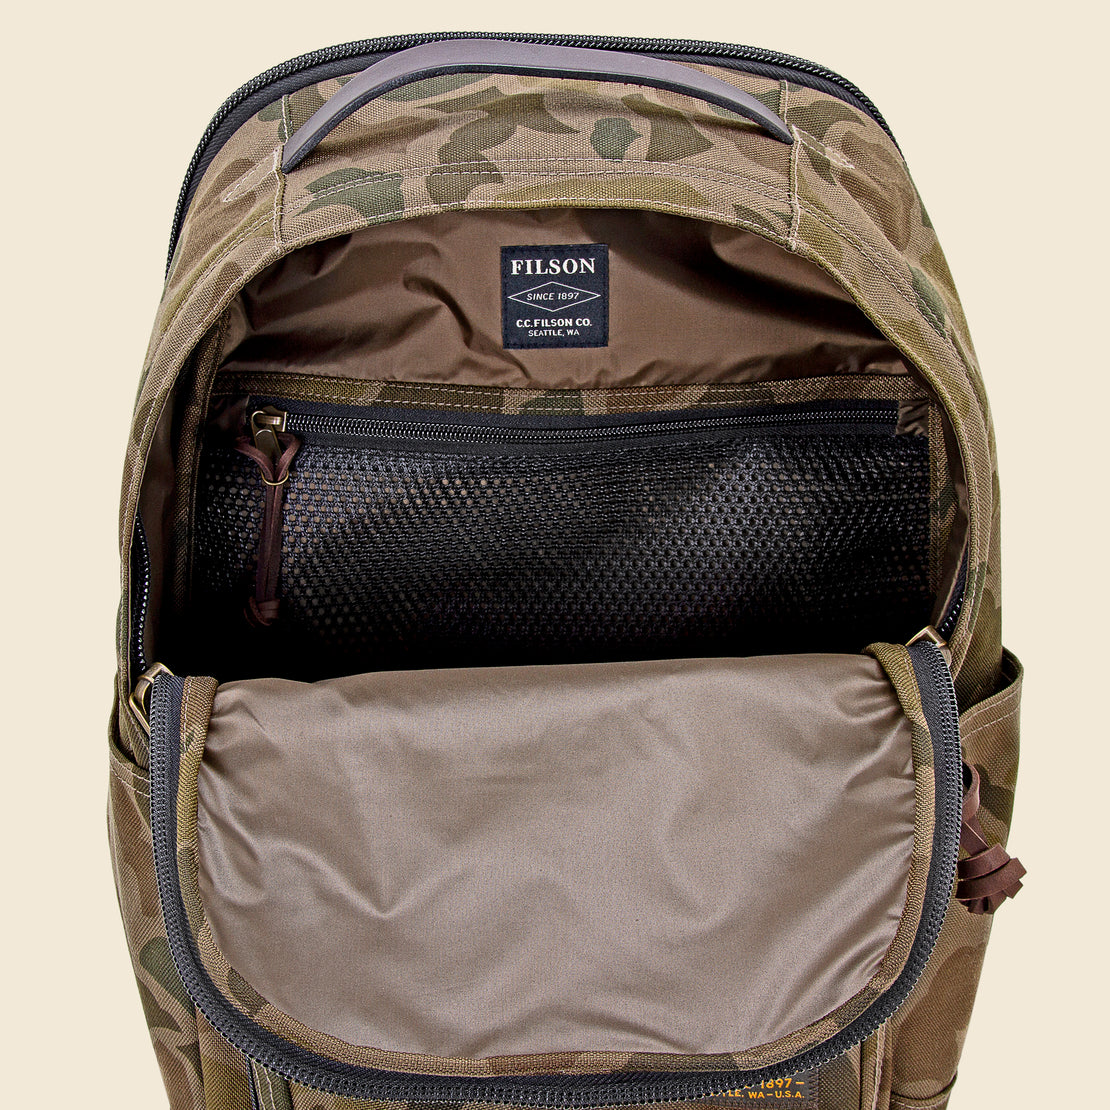 Dryden Backpack - Dark Shrub Camo - Filson - STAG Provisions - Accessories - Bags / Luggage